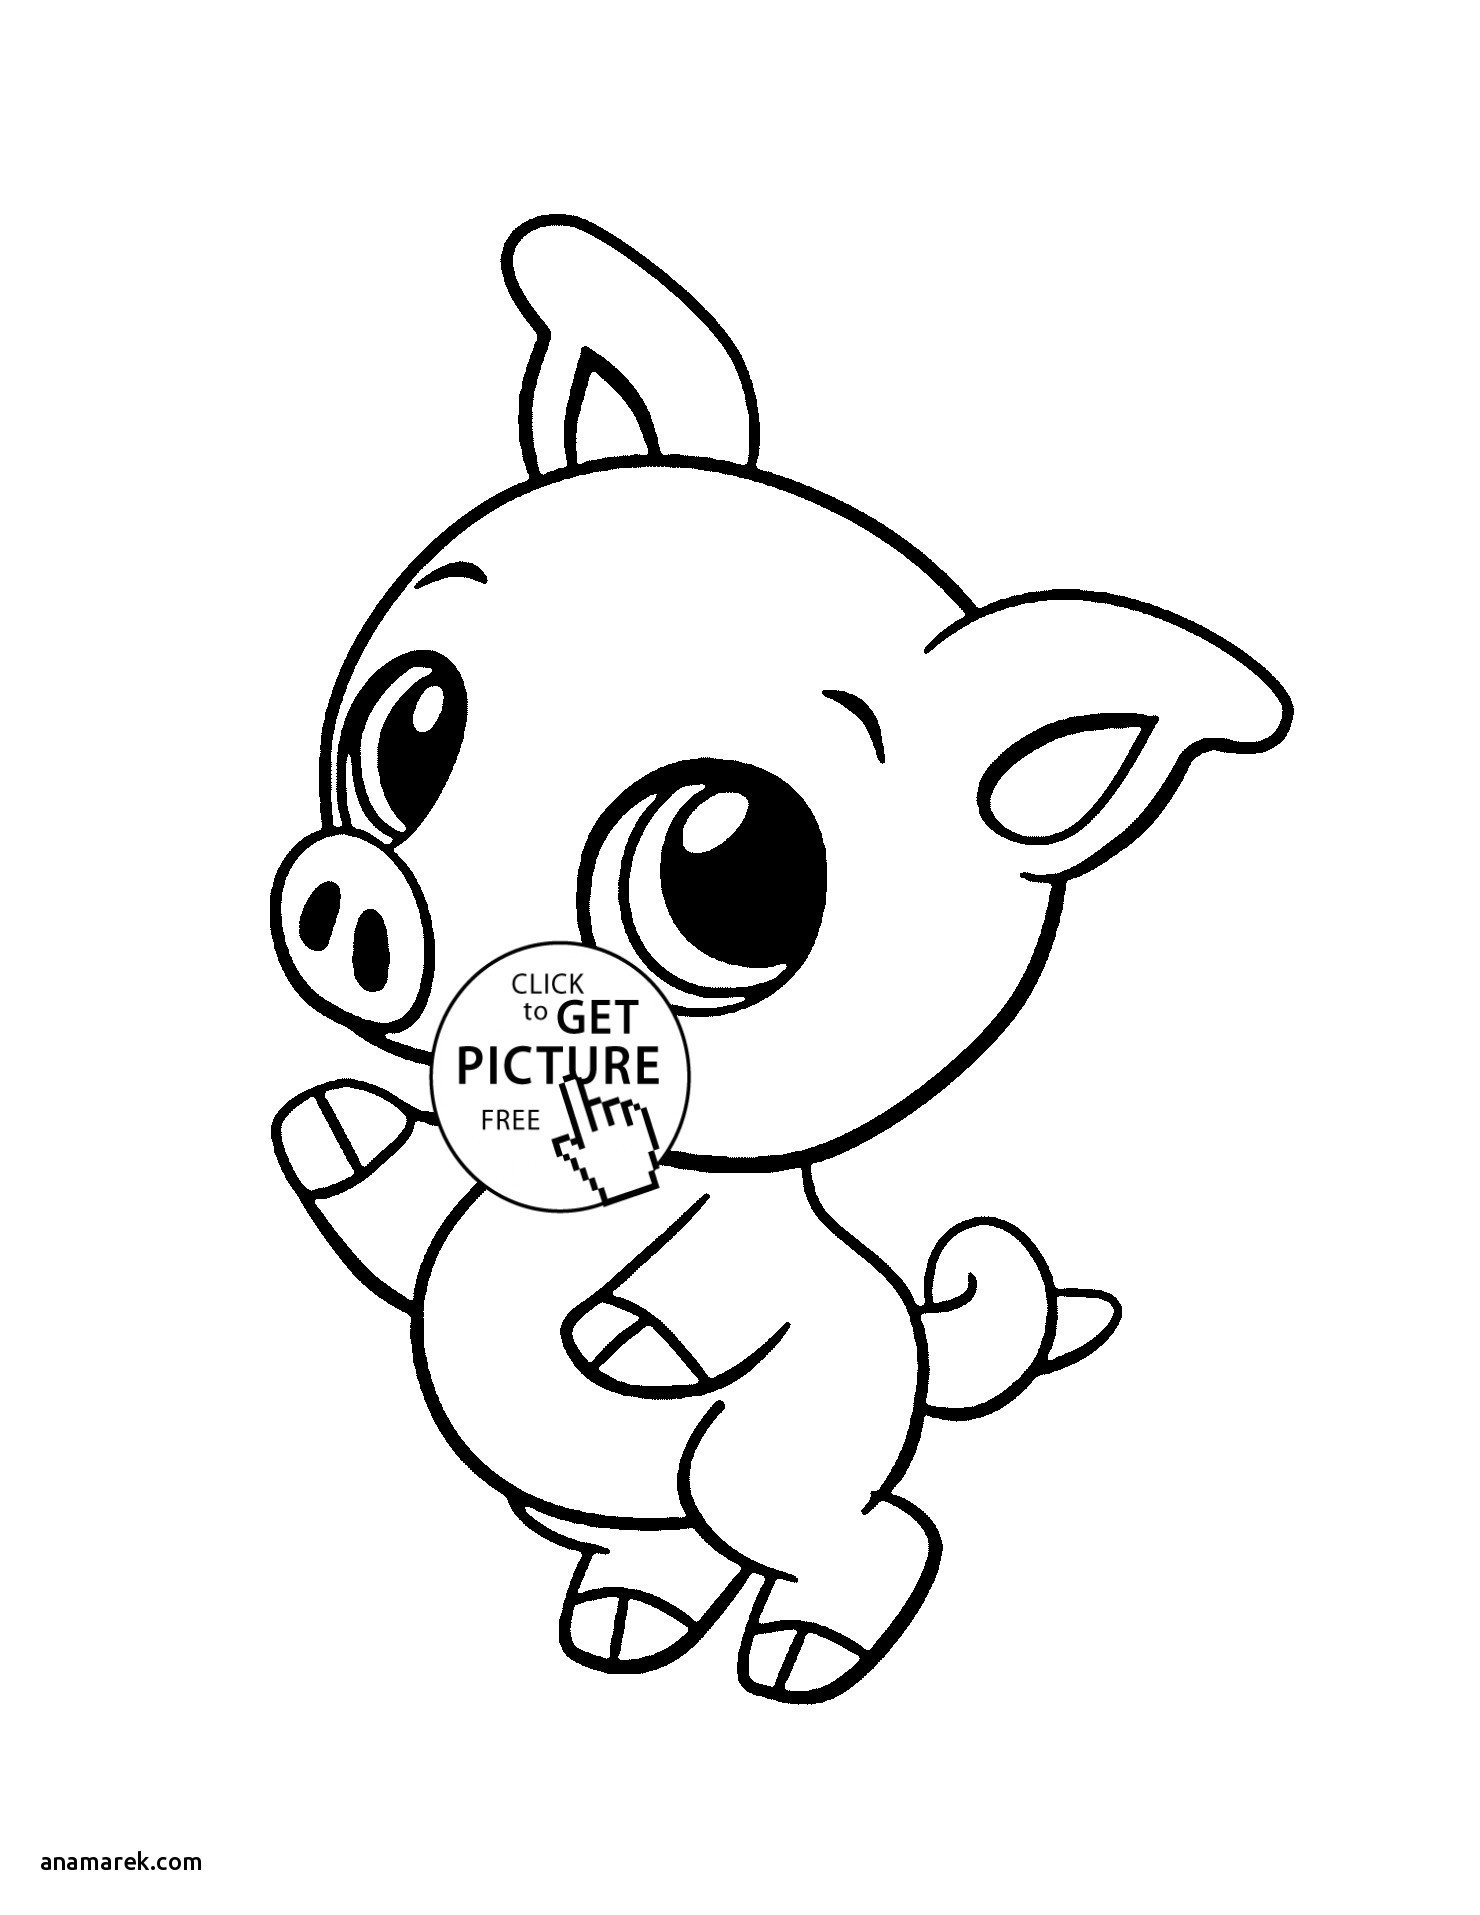 Baby Zoo Animal Coloring Pages New Zoo Animals Coloring Awesome Baby Animal Coloring Pages Elegant